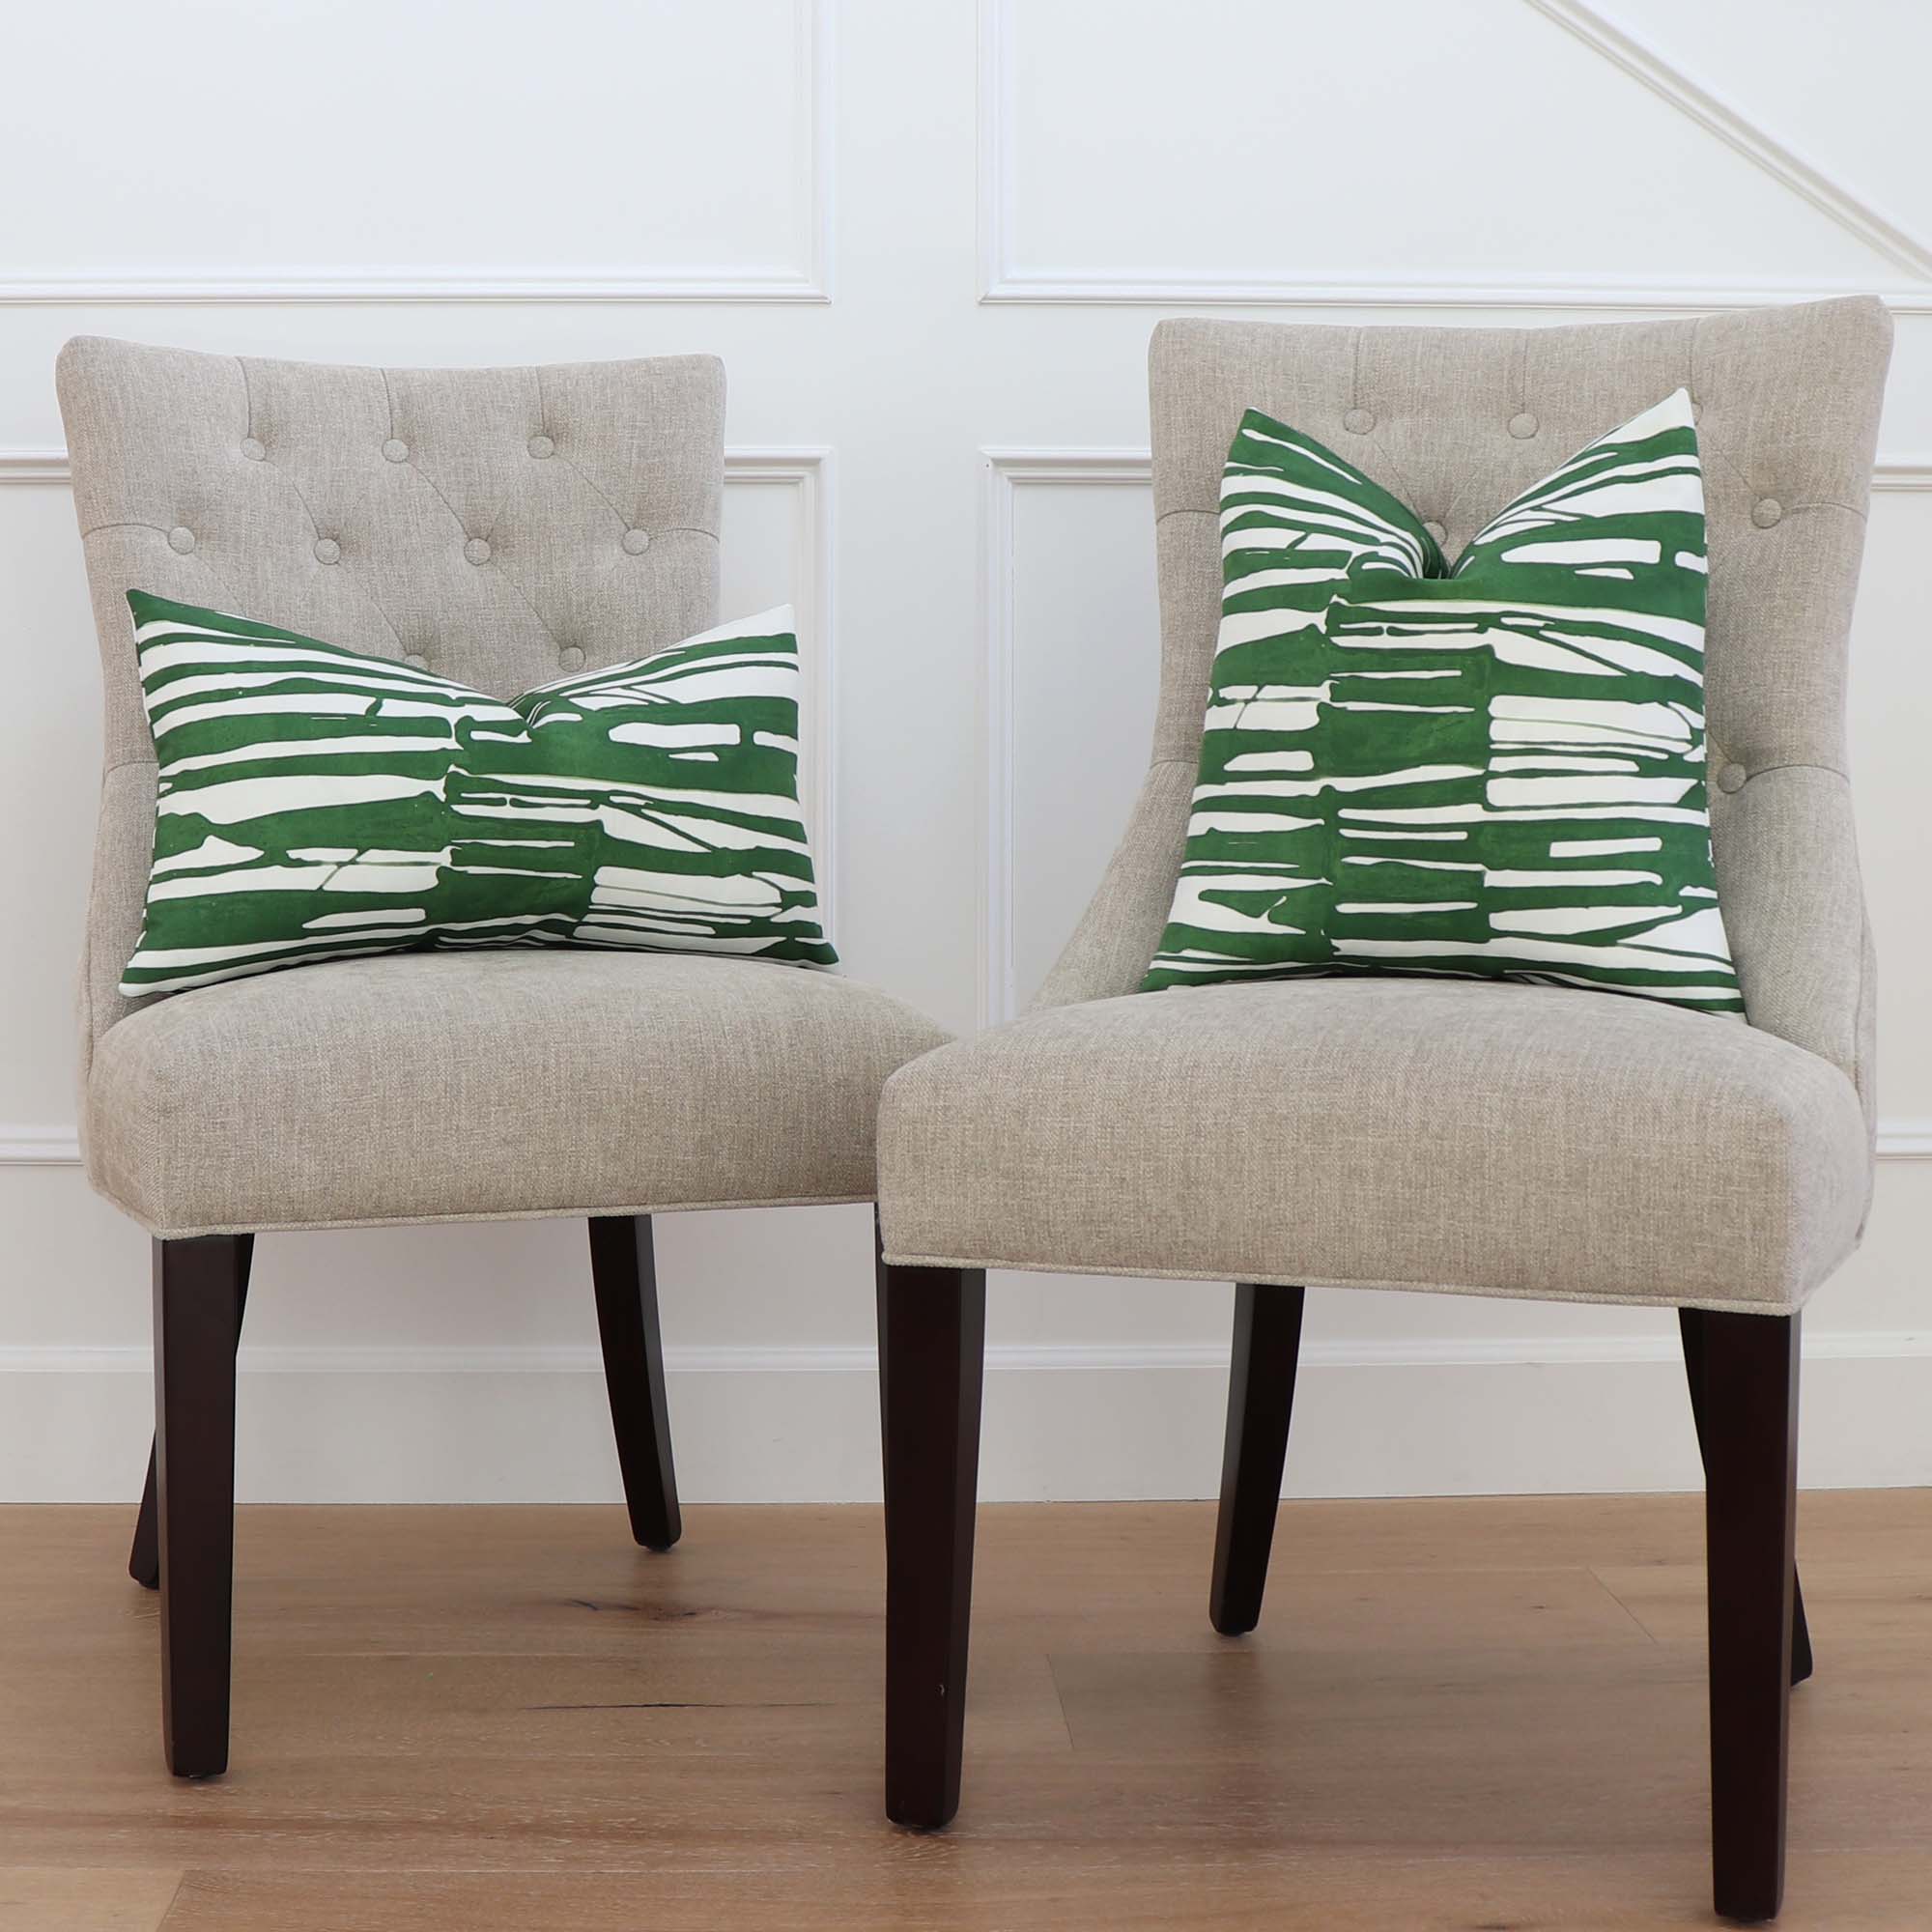 Thibaut Ischia Stripe Emerald Green and White Designer Throw  Pillow Cover on Home Decor Dining Chairs